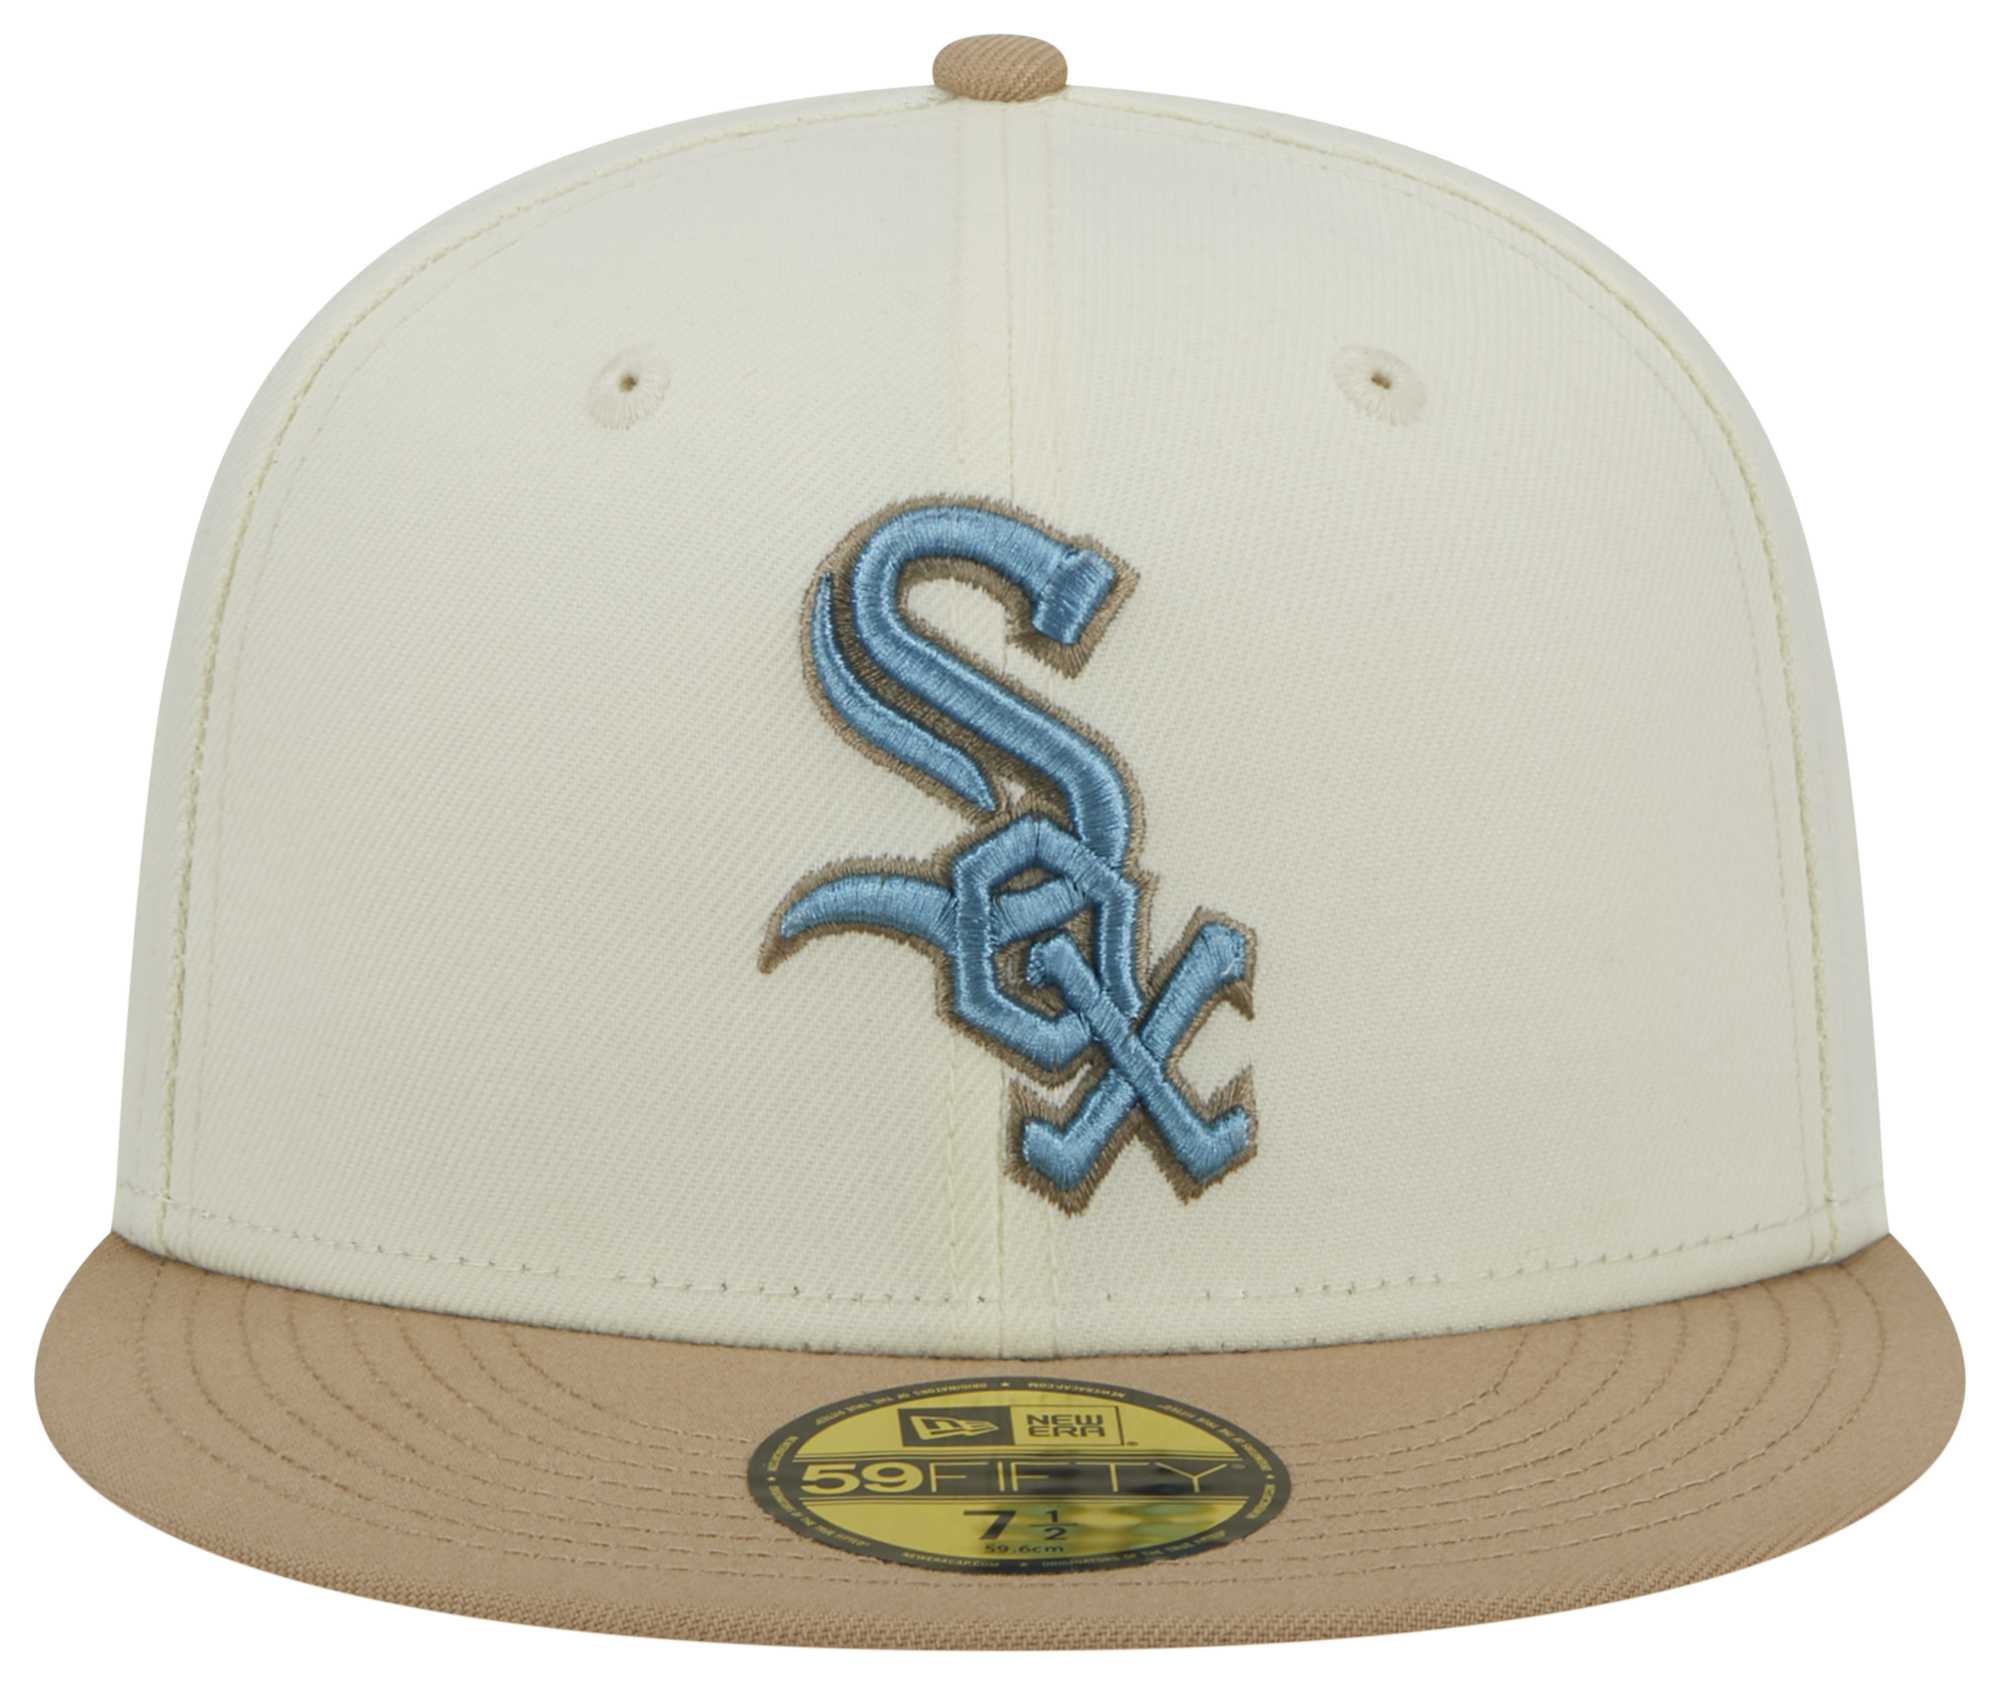 New Era White Sox Two Tone City Icon Fitted Cap